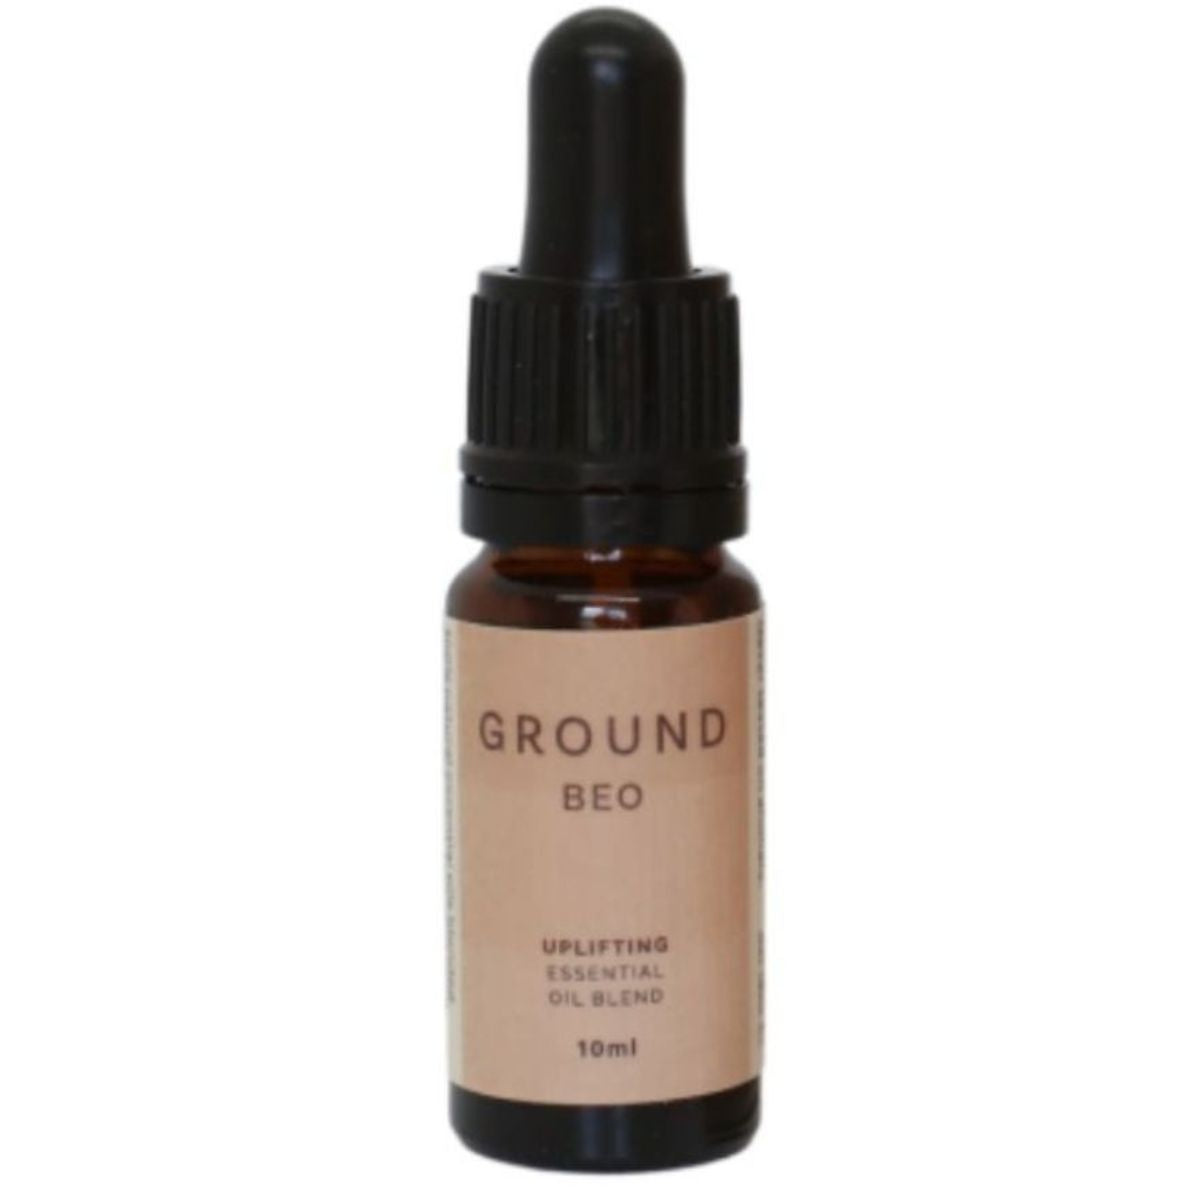 GROUND BEO Uplifting Essential Oil Blend